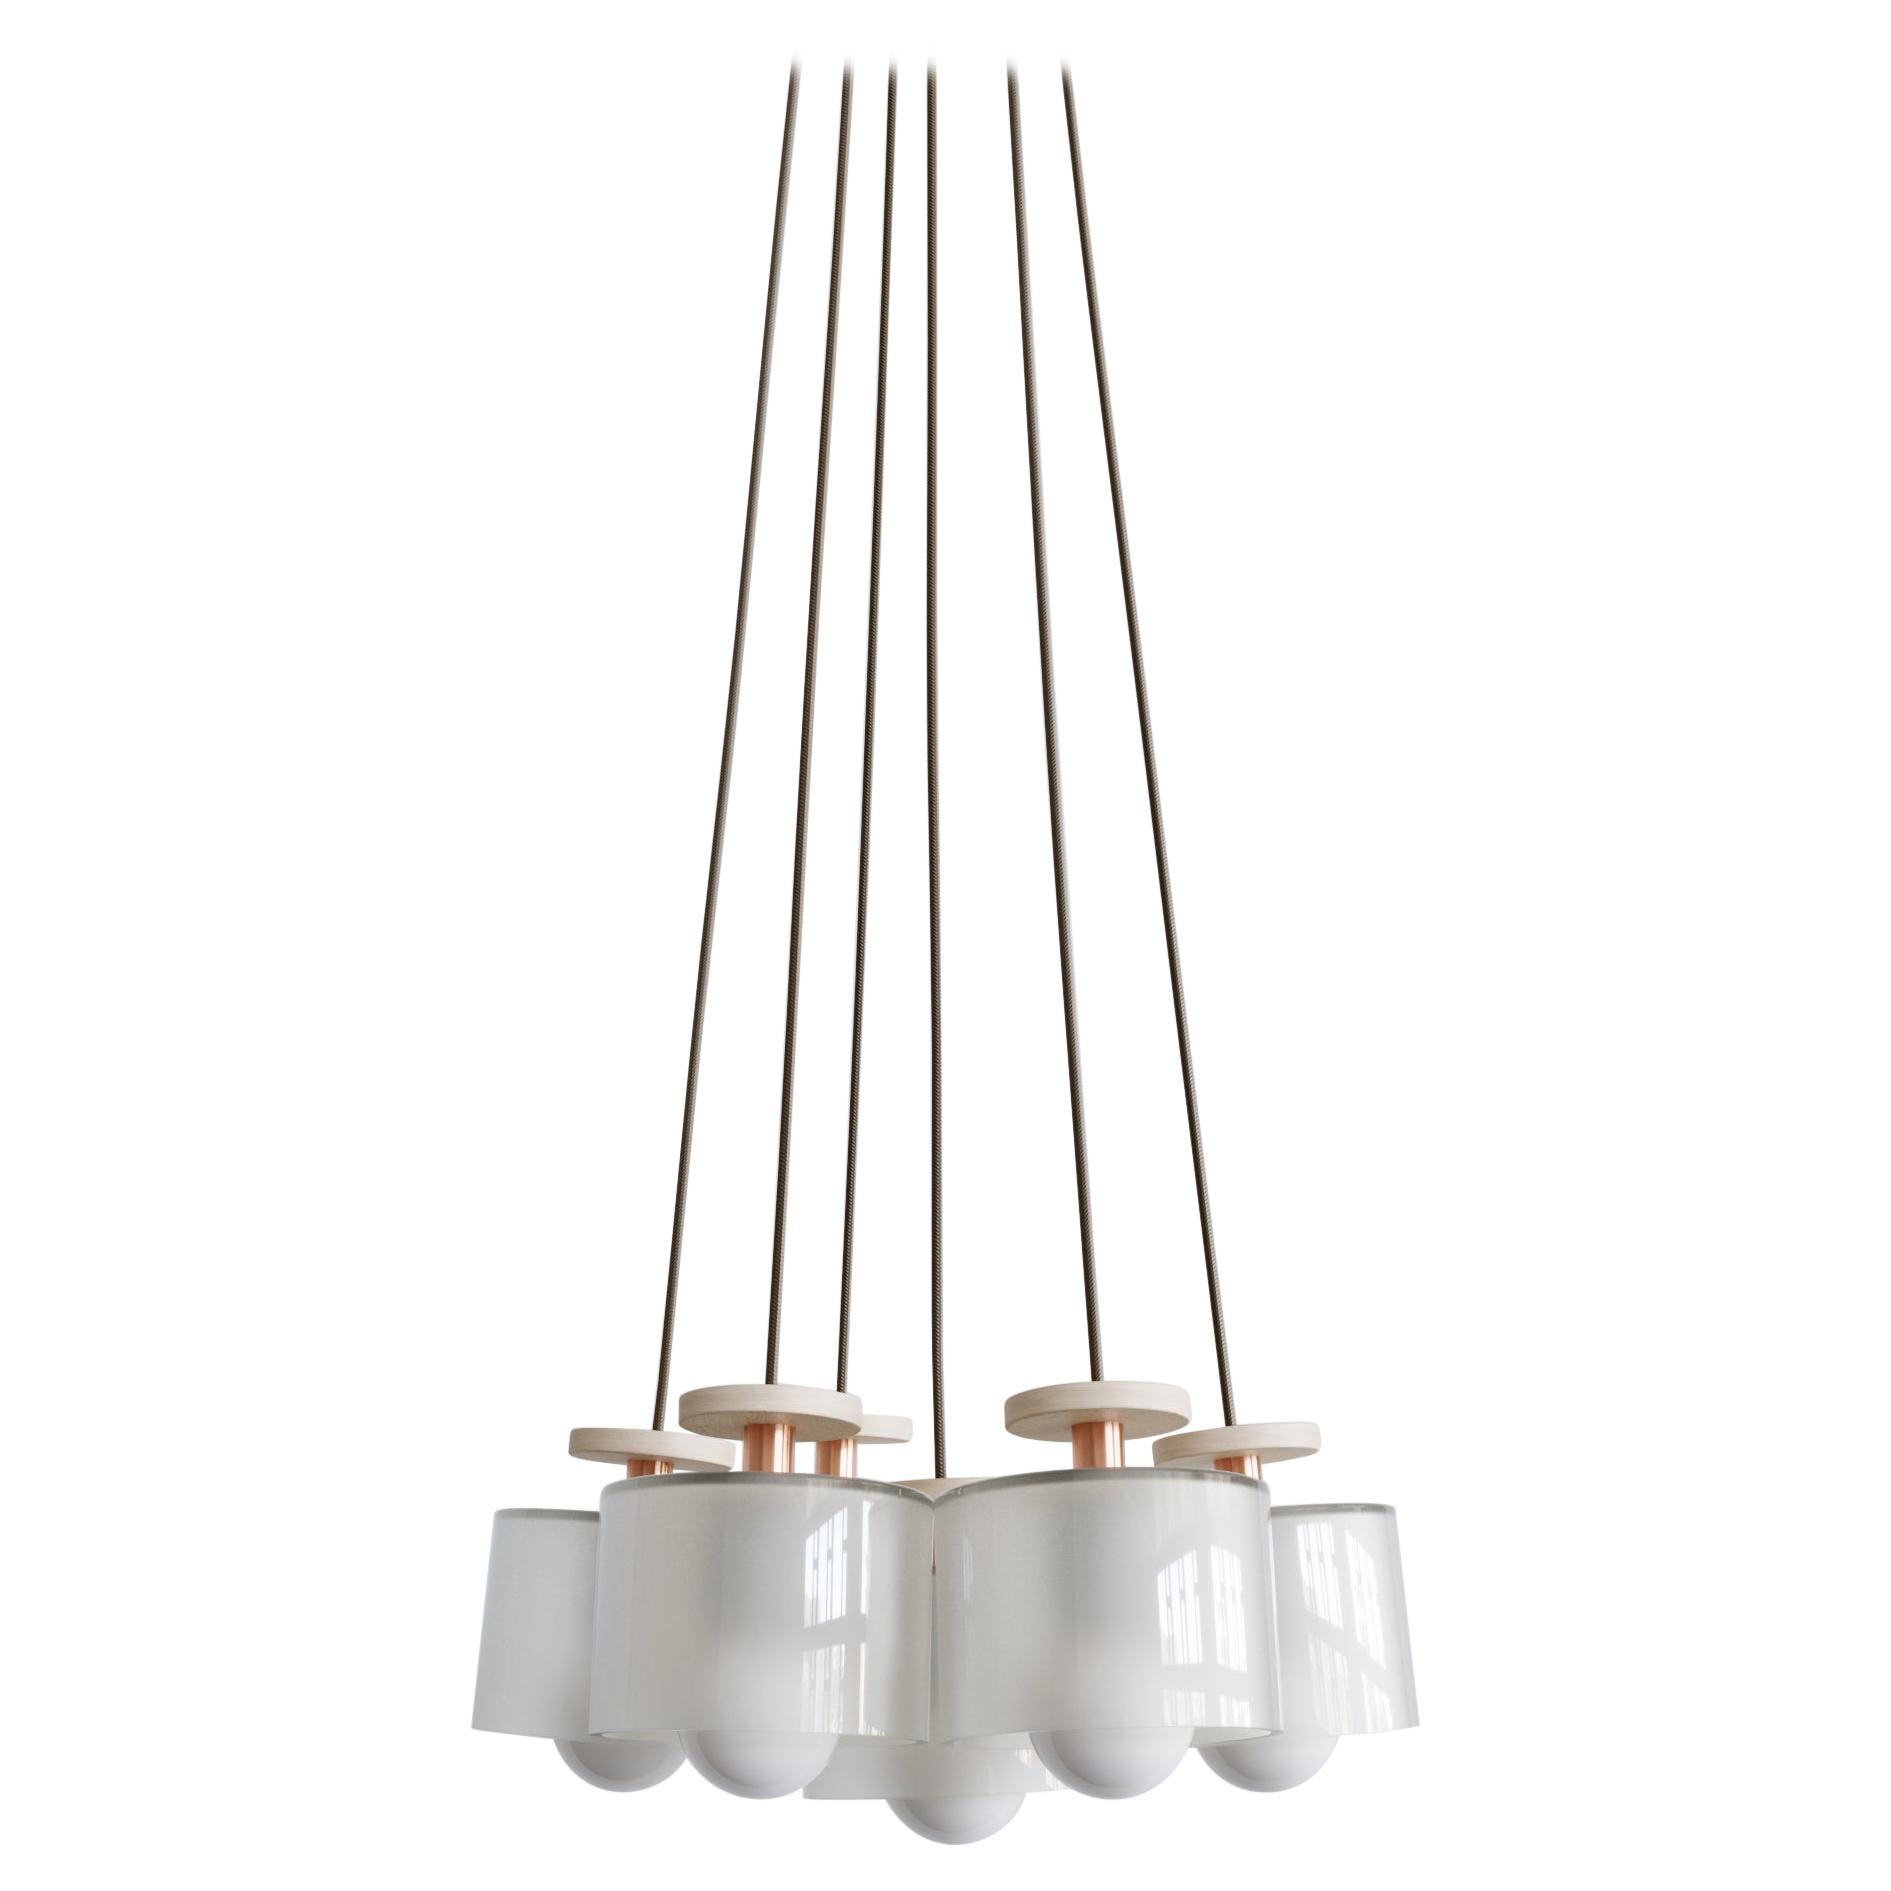 Spun 6-Piece Chandelier Pendant in Frosted Glass Shade, Field Adjustable Light